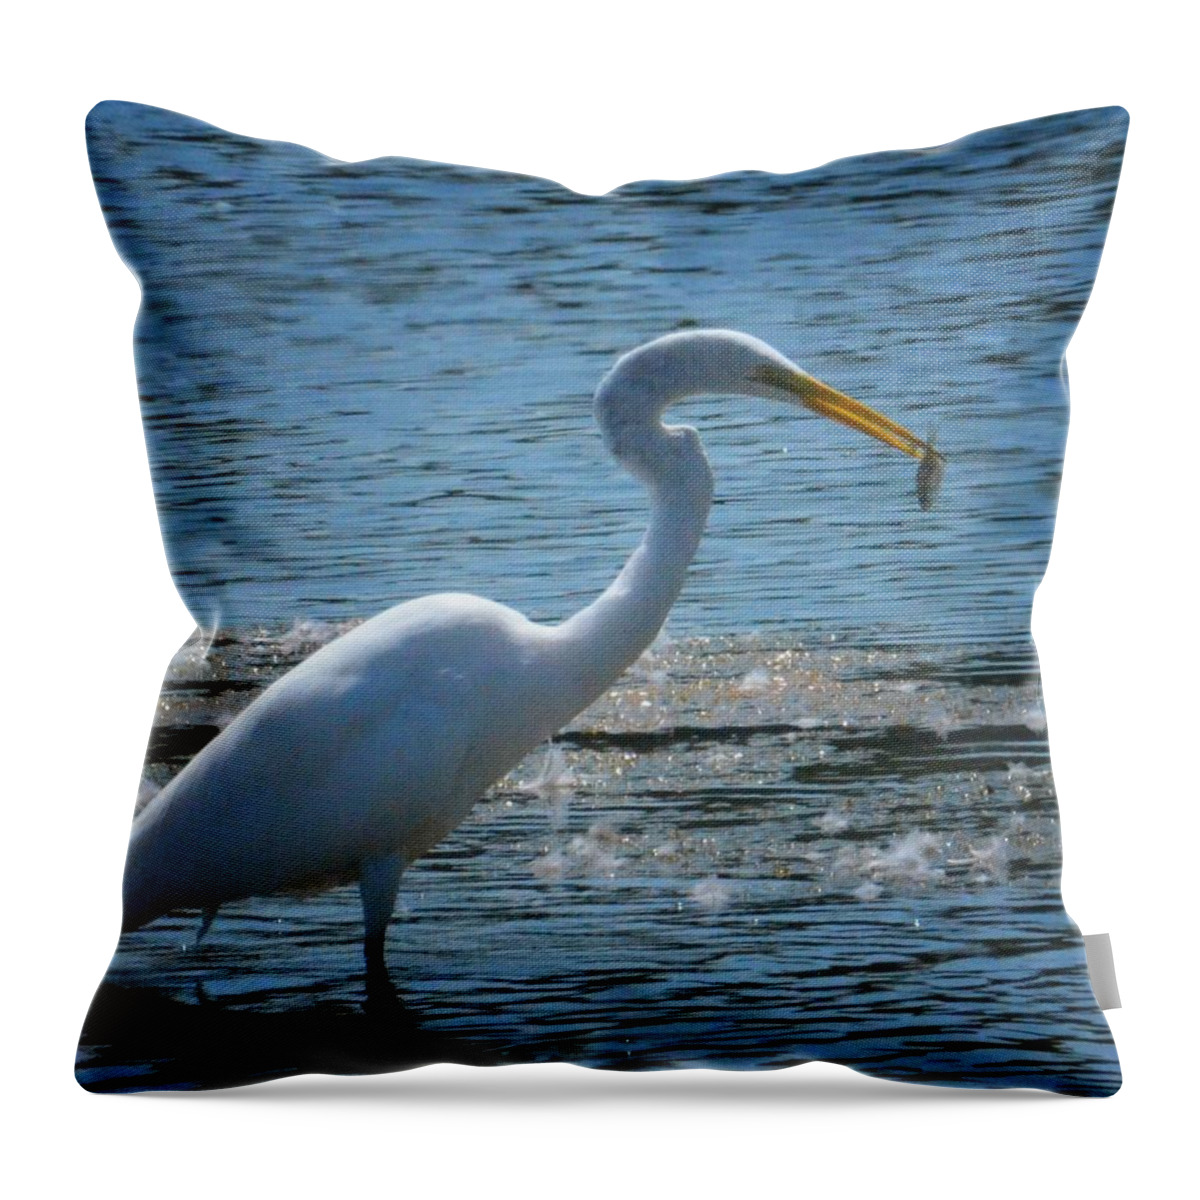 Egret 15-03 Throw Pillow featuring the photograph Egret 15-03 by Maria Urso